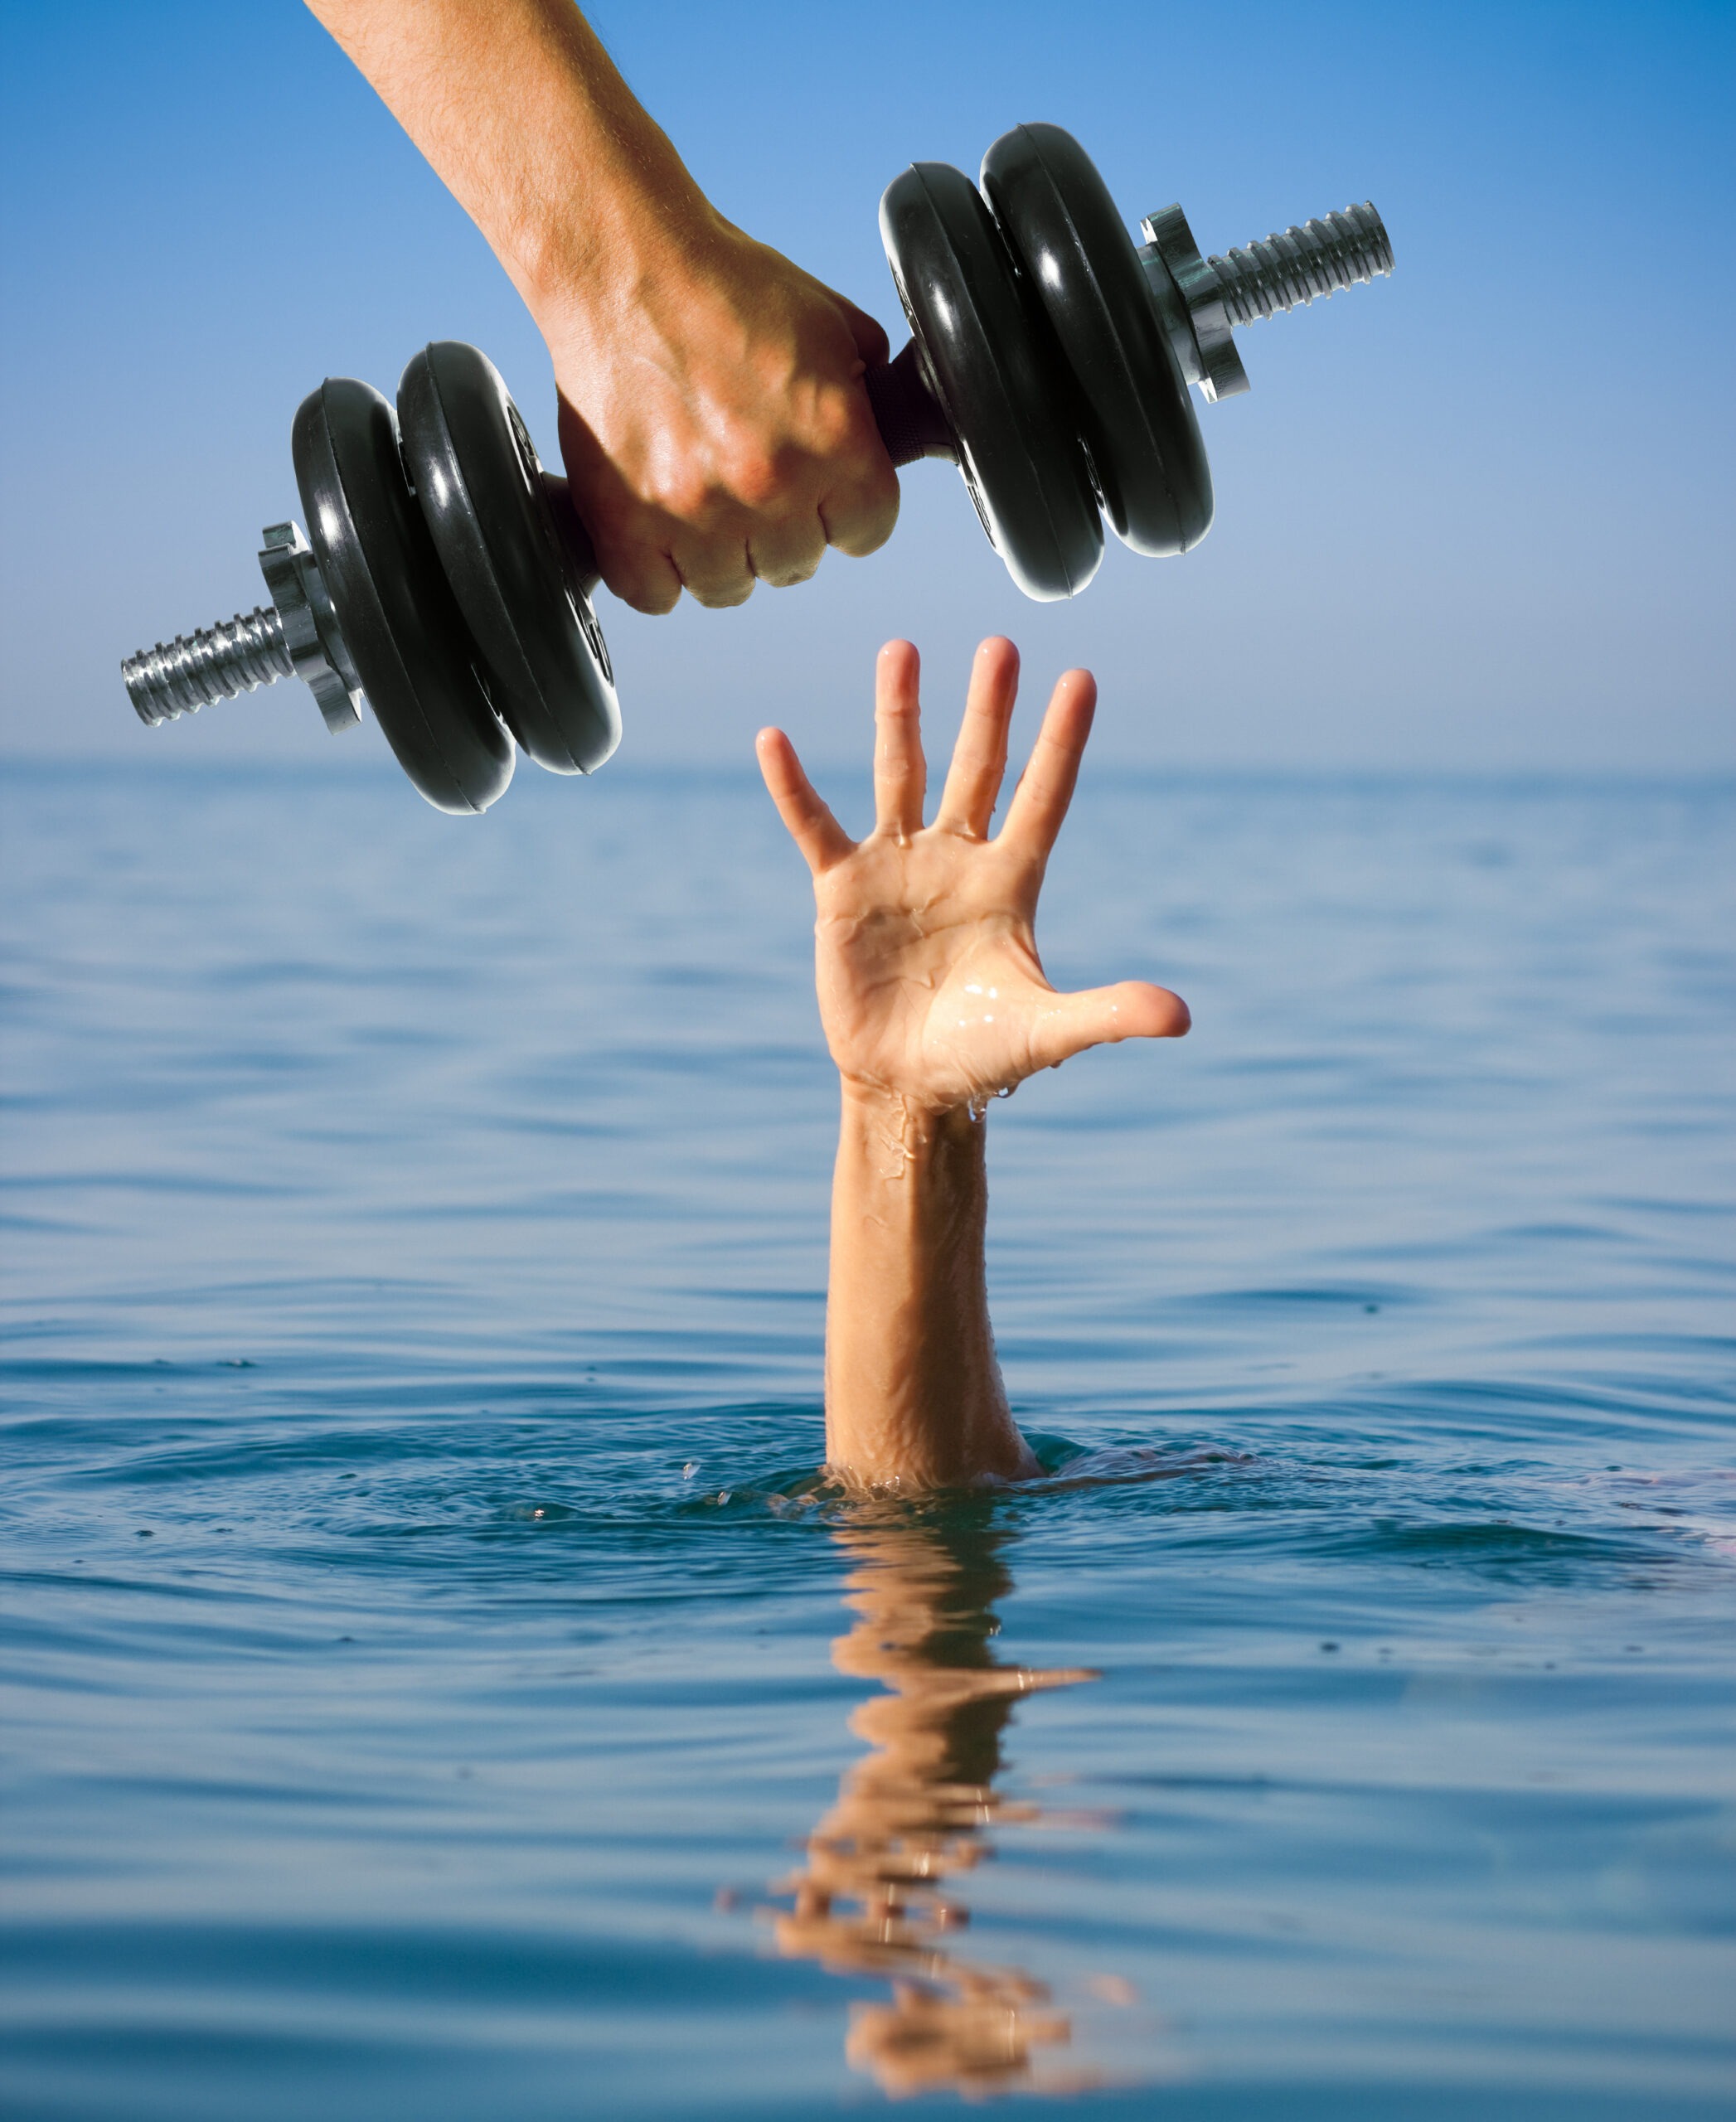 A person underwater reaches their hand out of the water for help, while an arm reaches down with a dumbbell in its hand.